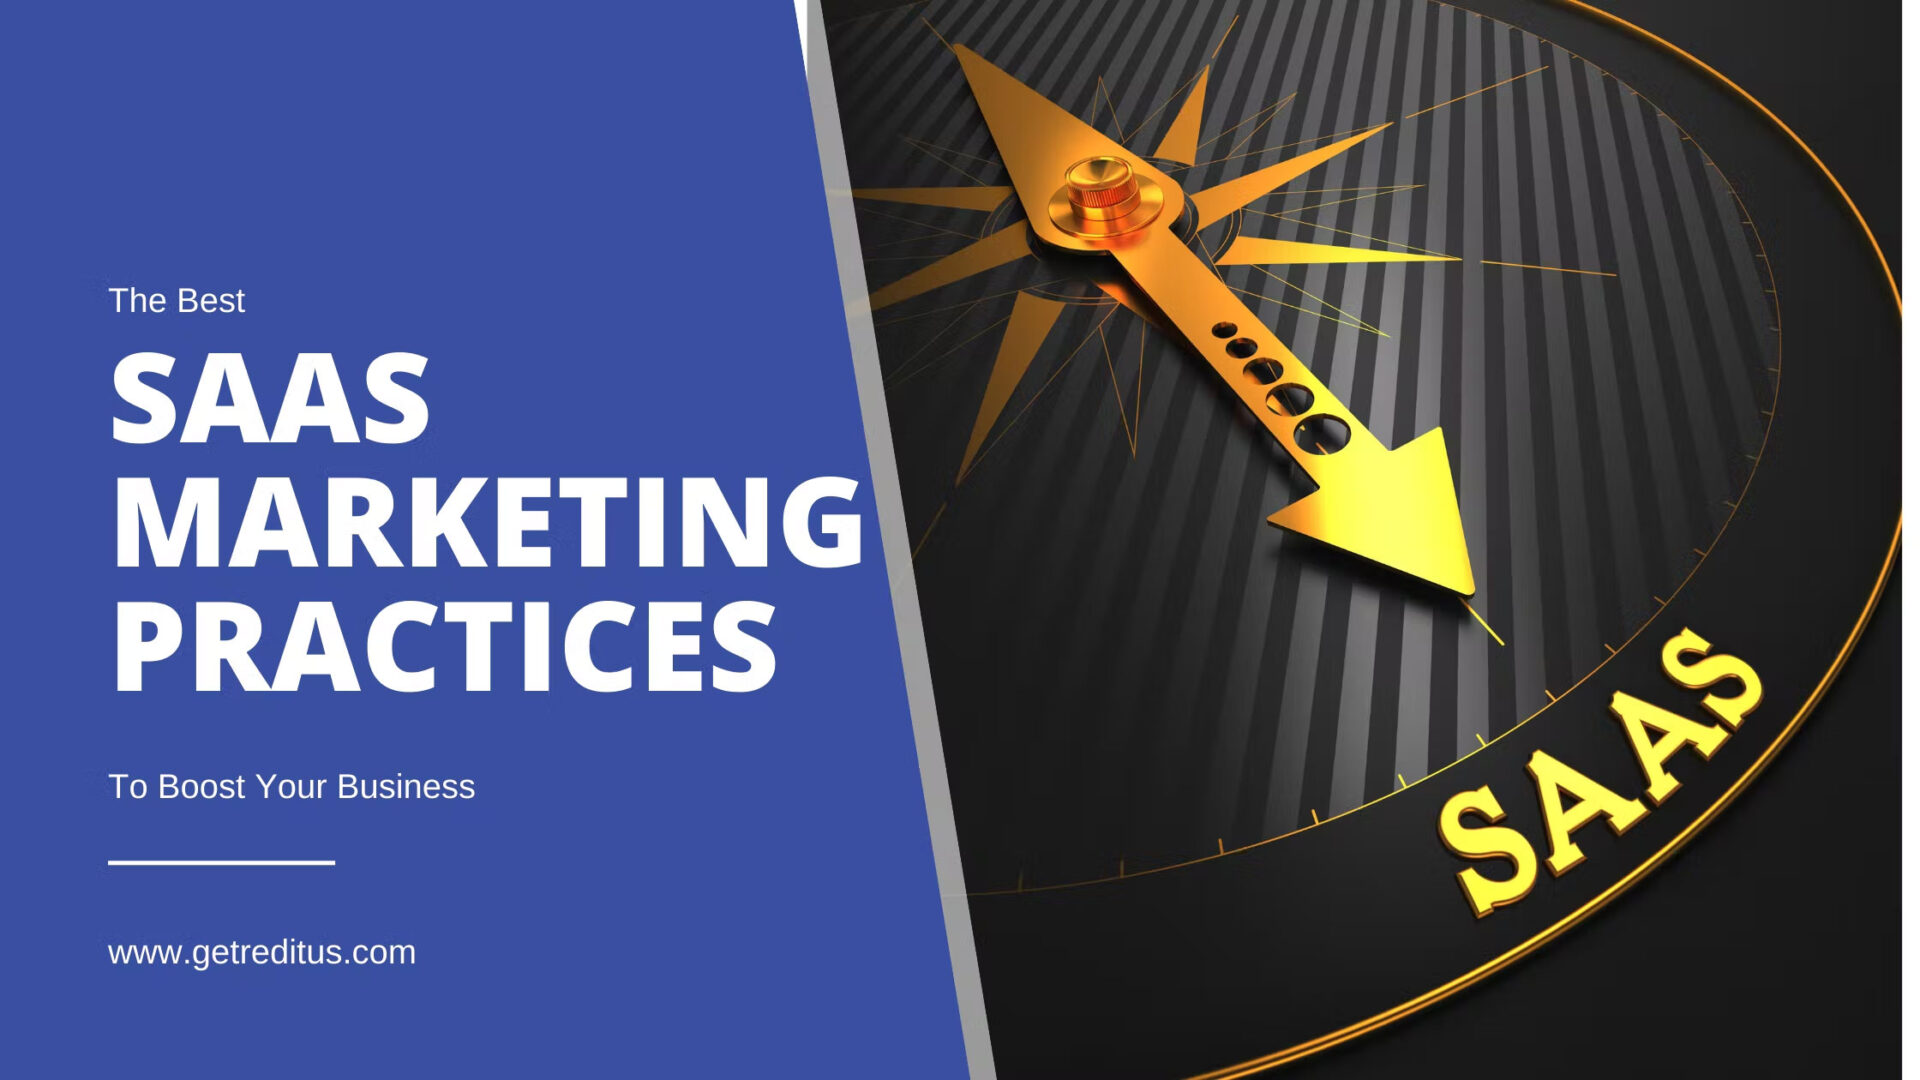 Best SaaS Marketing Practices To Boost Your Business